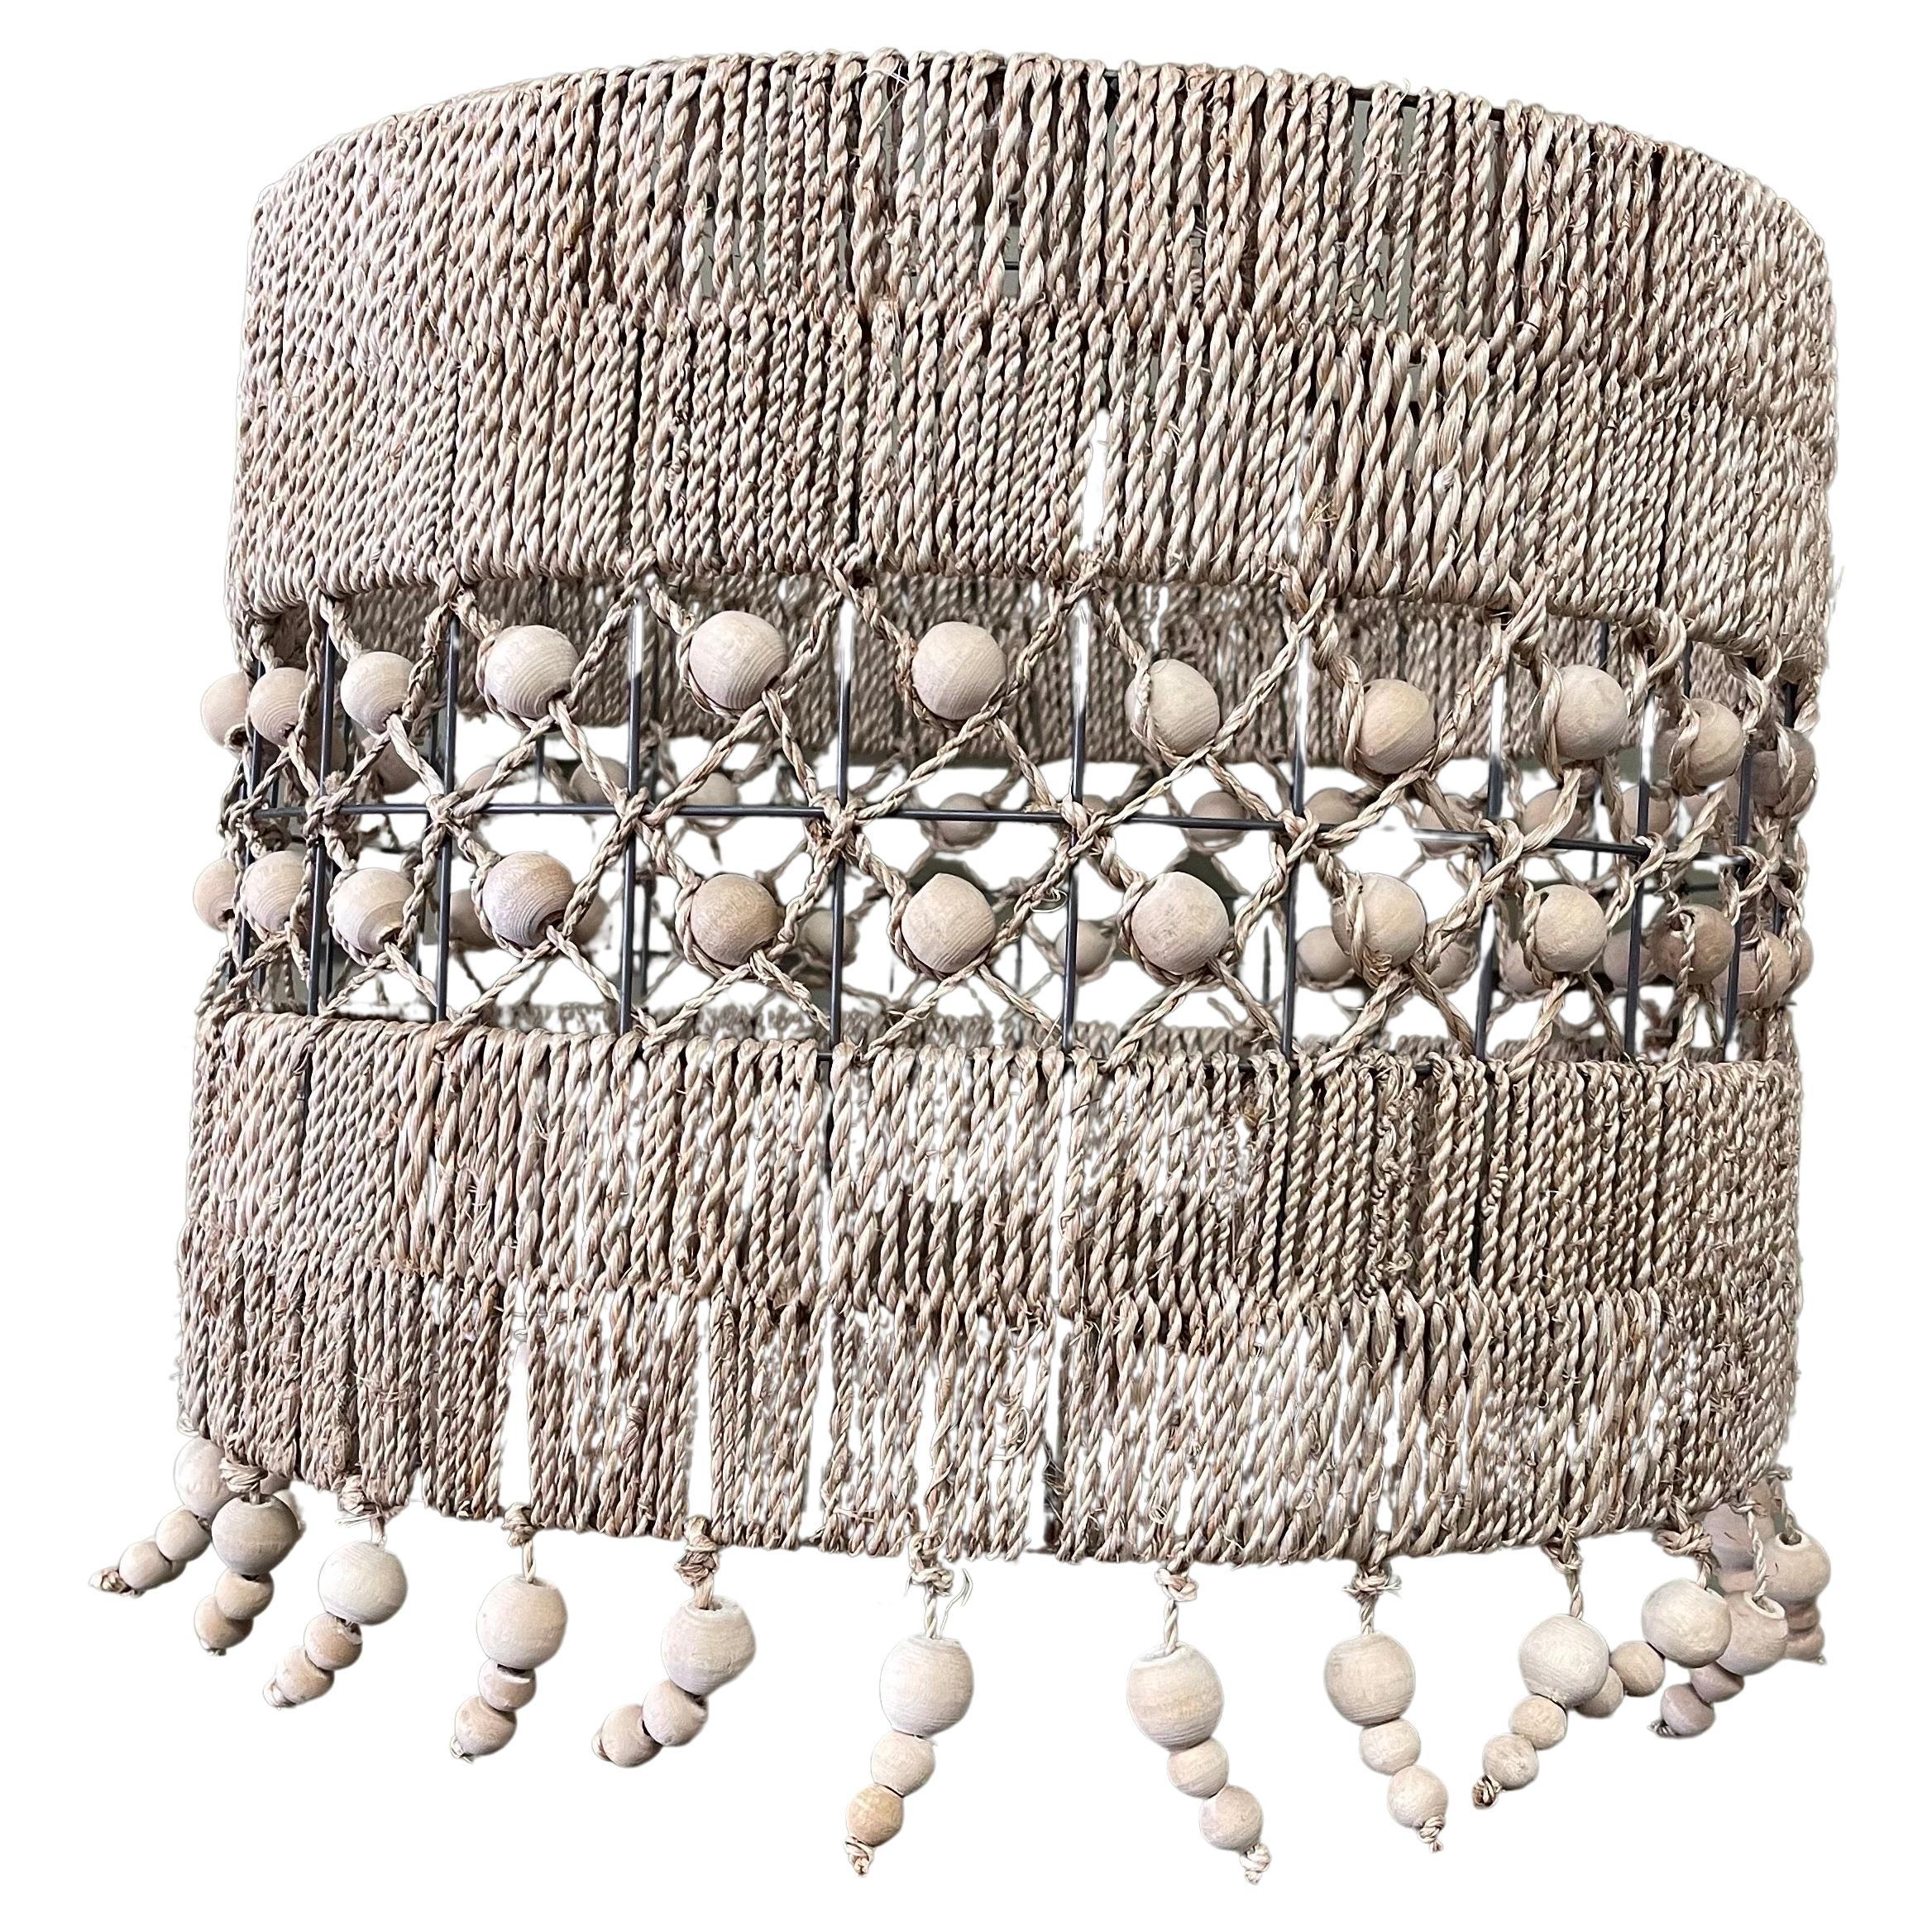 Cool Bohemian Cord and Wood Beads Drum Lamp Shade For Sale